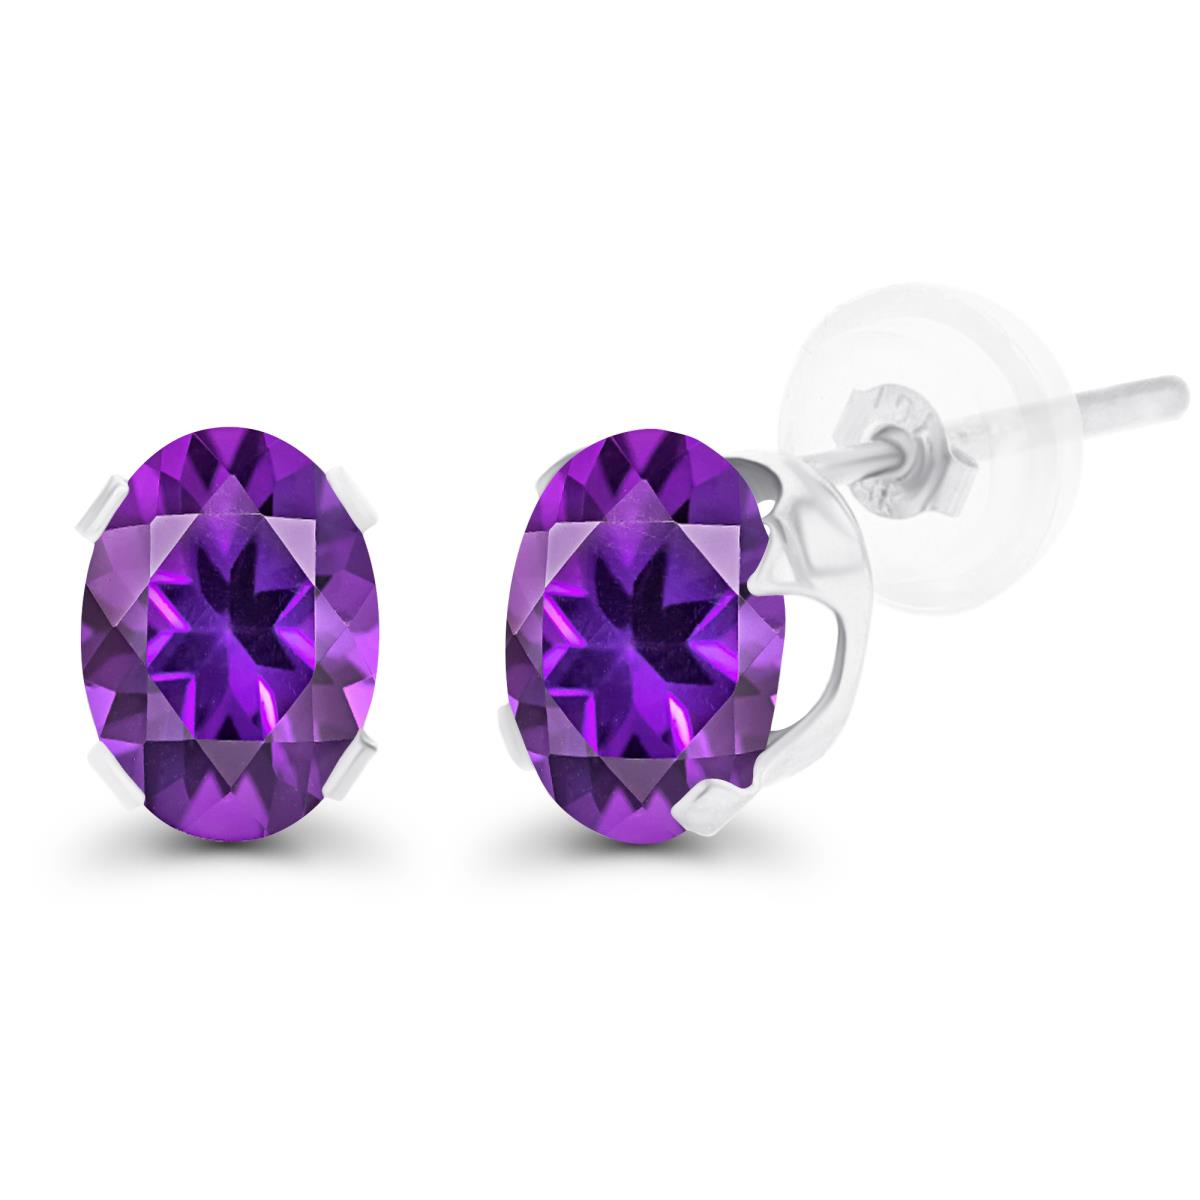 10K White Gold 7x5mm Oval Amethyst Stud Earring with Silicone Back